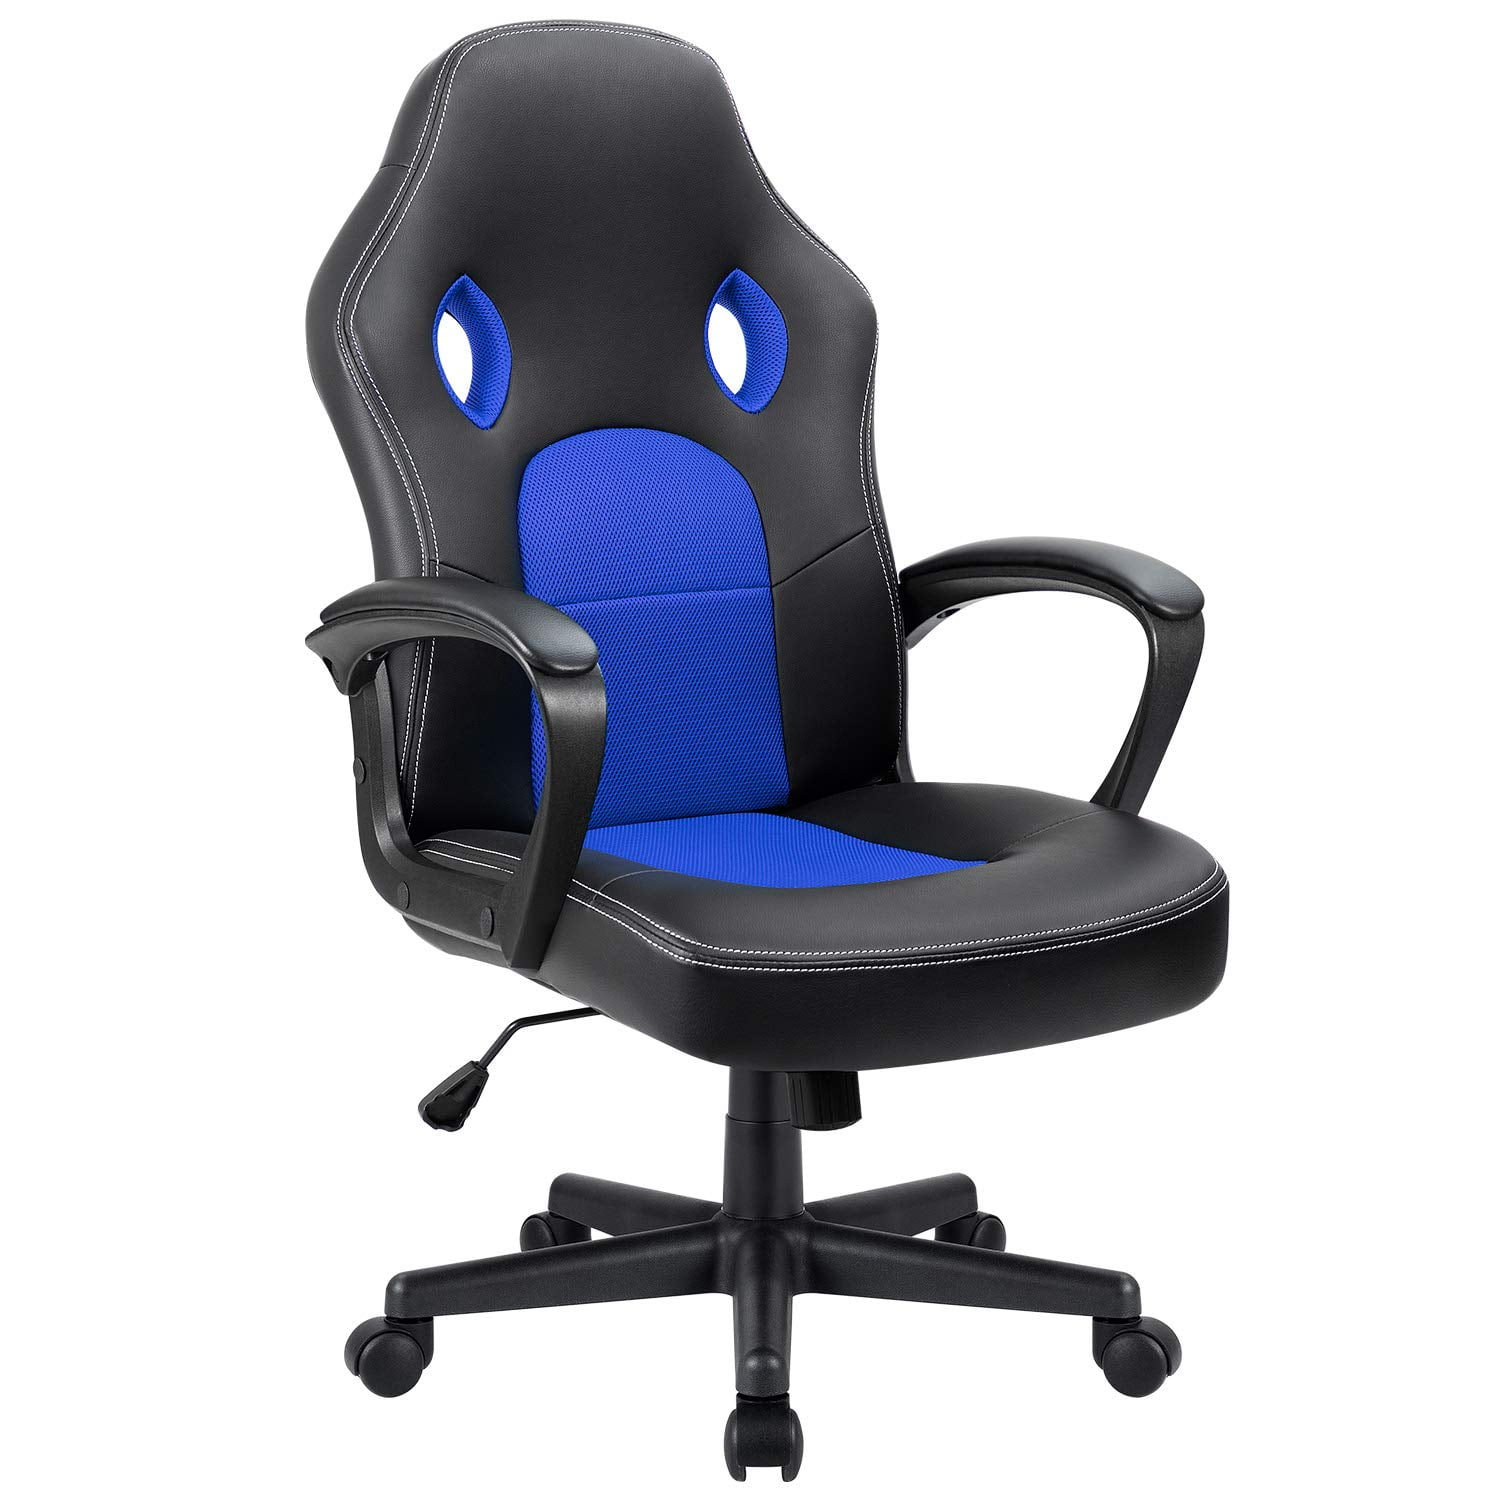 Walnew Blue High Back Office Desk Chair Gaming Chair Ergonomic Computer Adjustable Leather